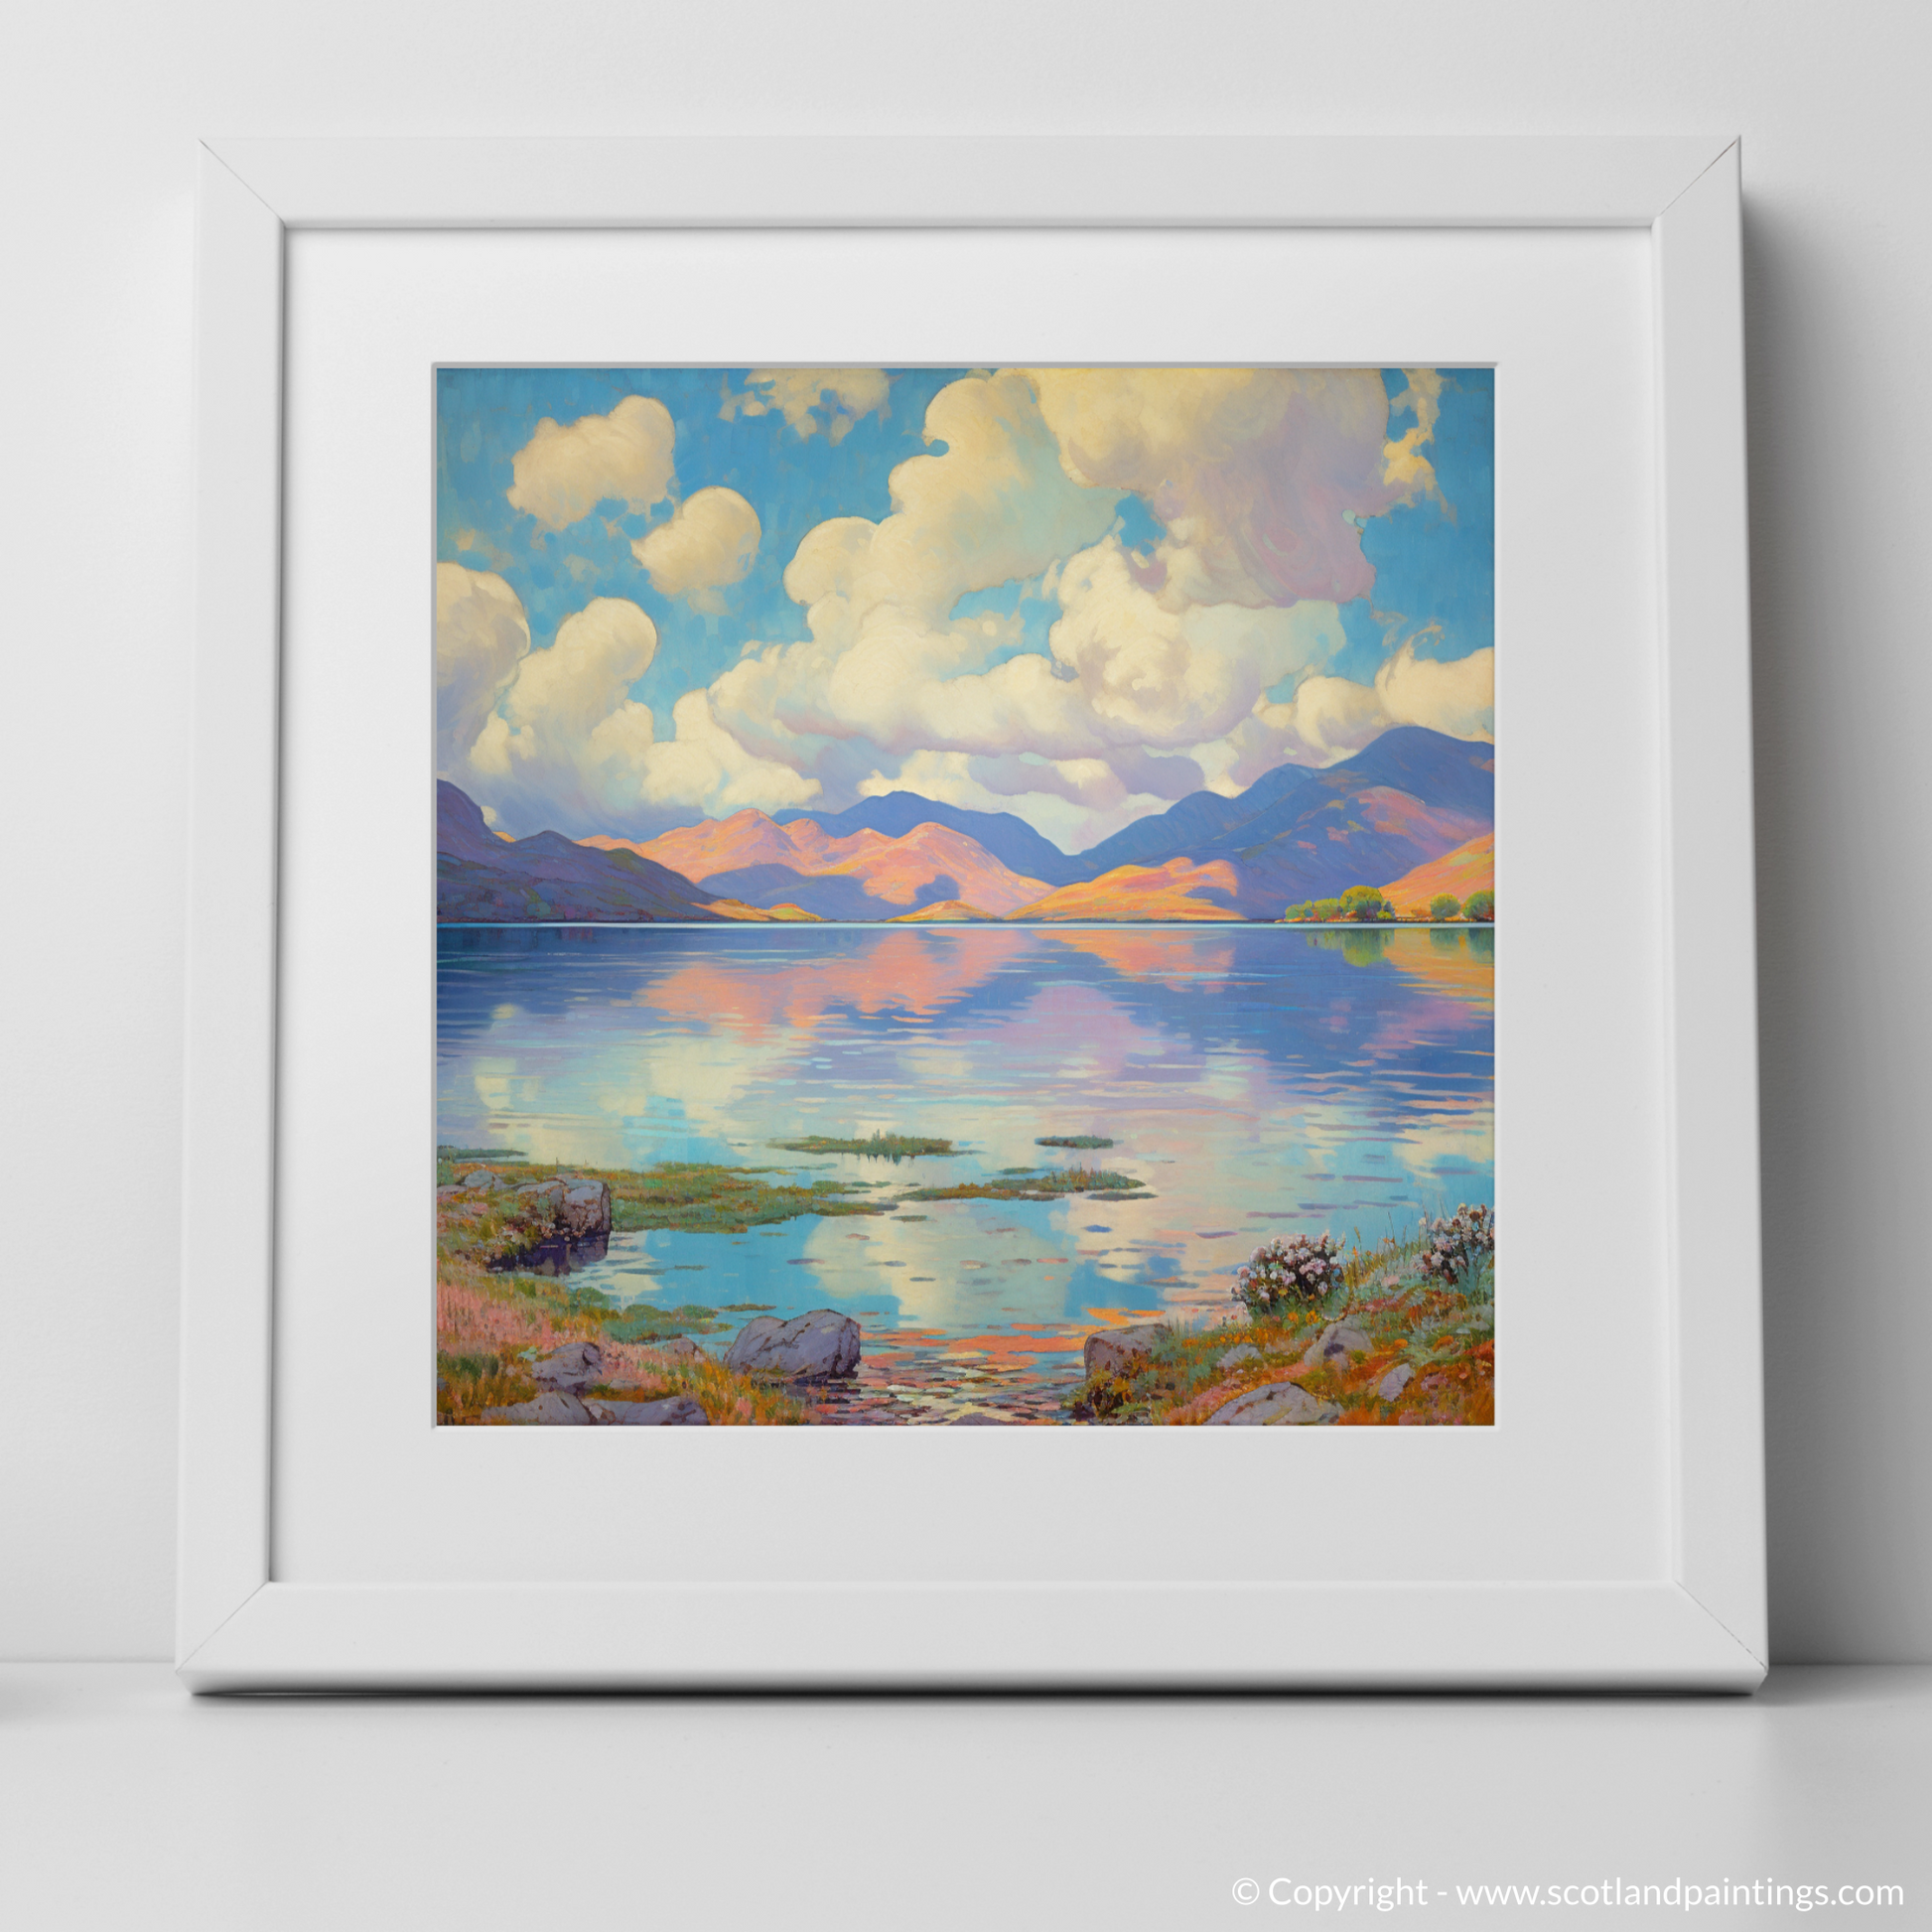 Art Print of Loch Linnhe, Highlands in summer with a white frame